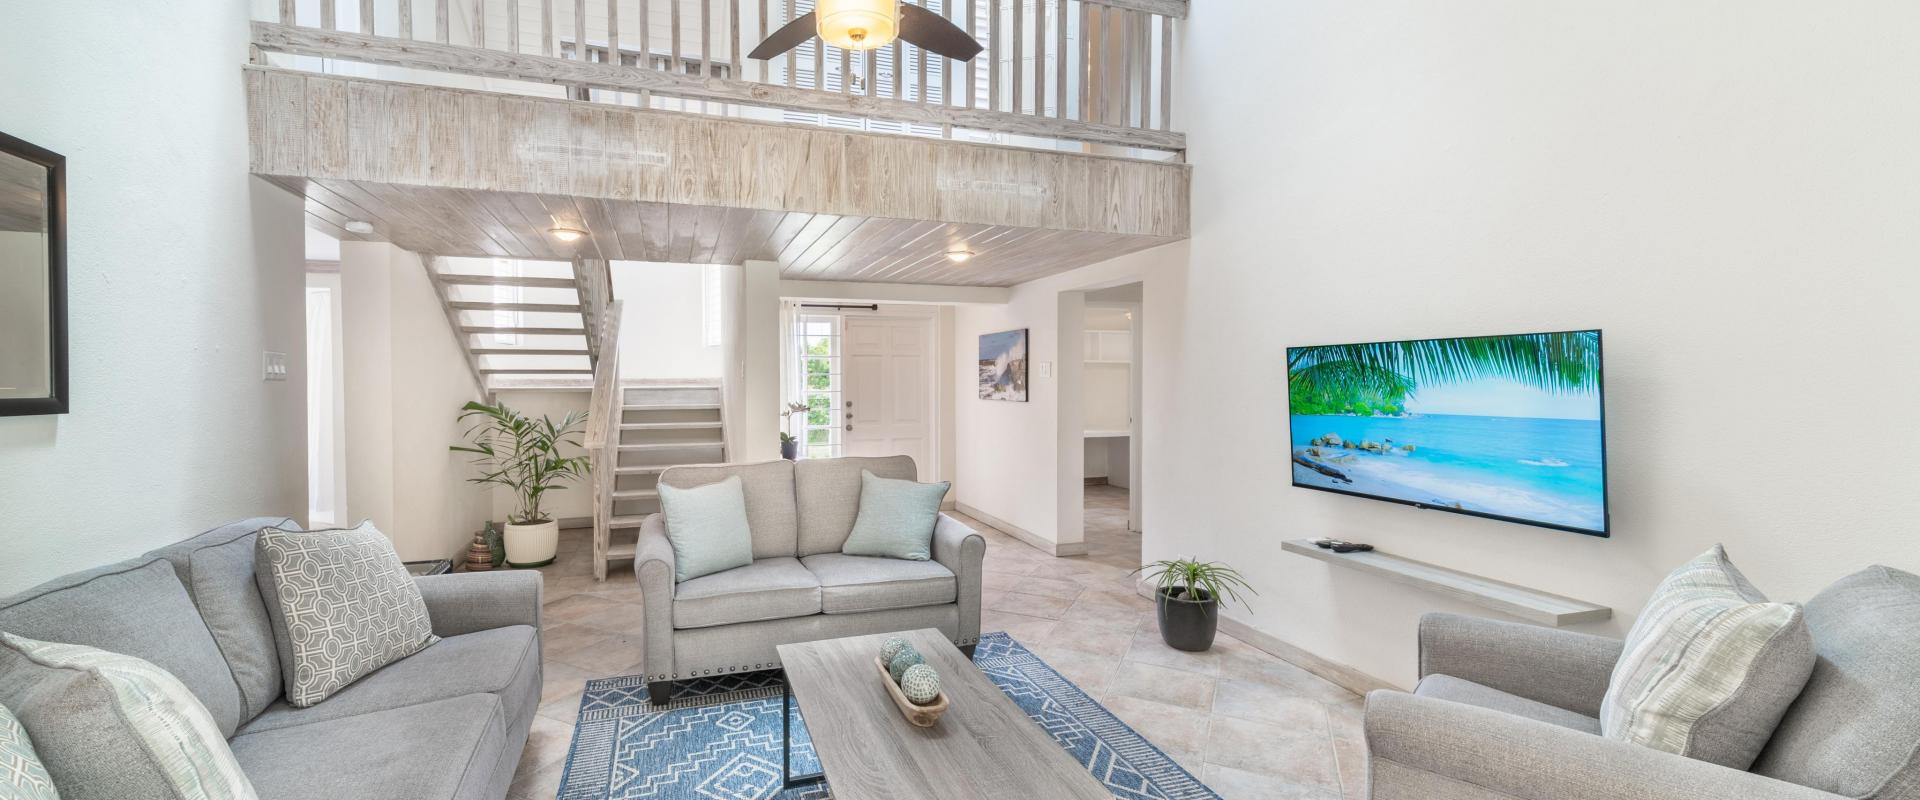 149 Salters Road Barbados Holiday Rental Sandy Lane Barbados Living Room and TV with Stairs View